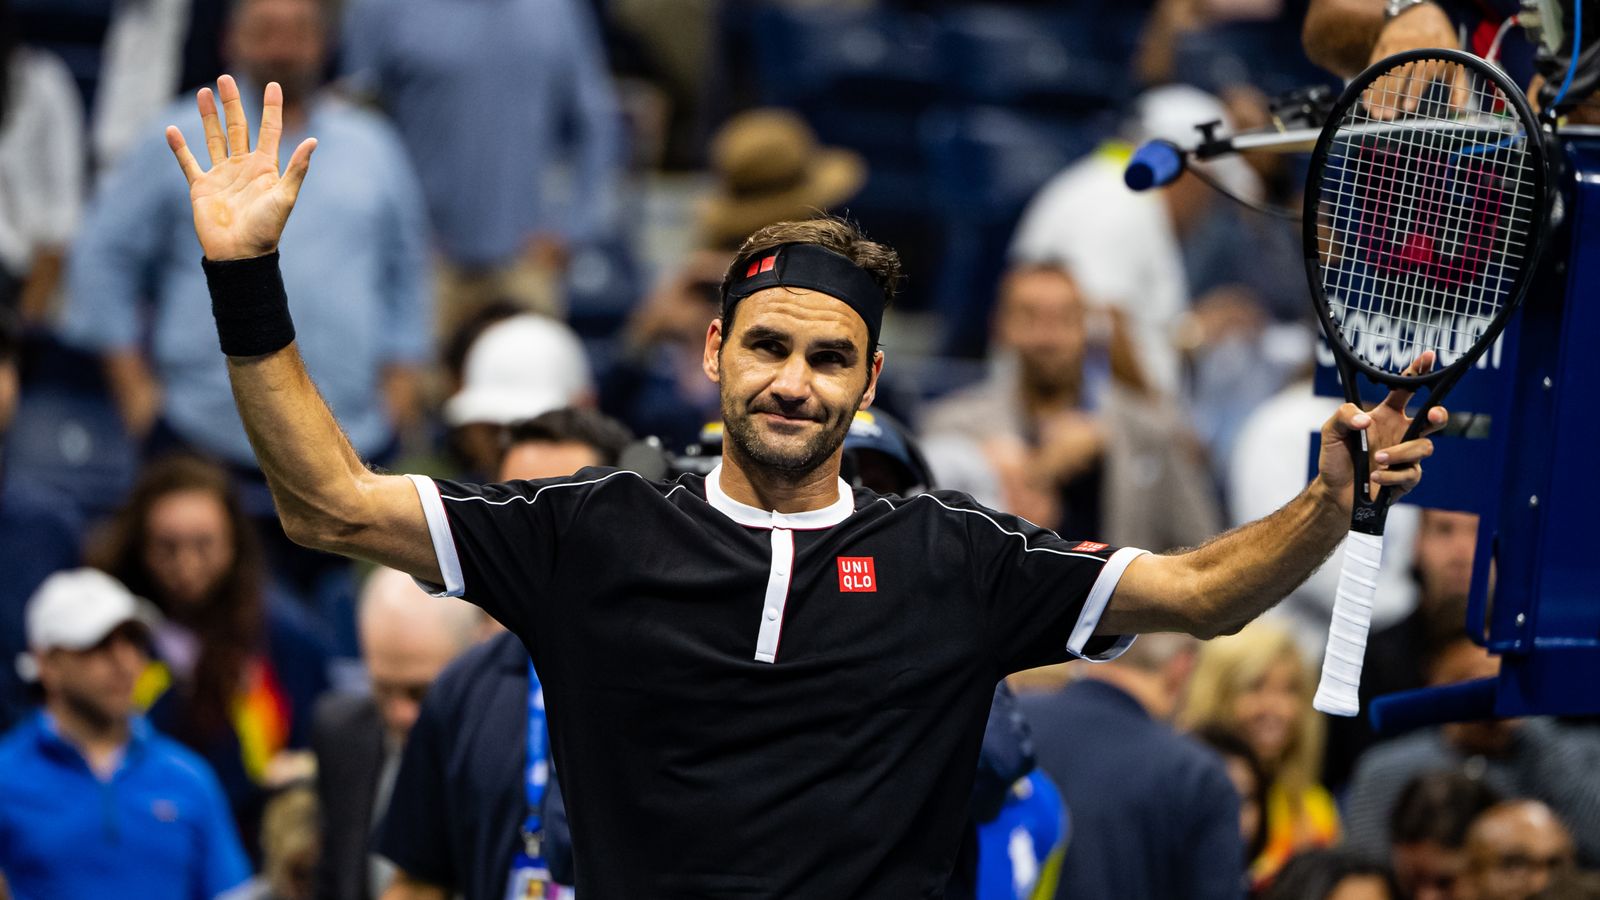 US Open: Roger Federer squeezes through against Indian qualifier Sumit Nagal | Tennis ...